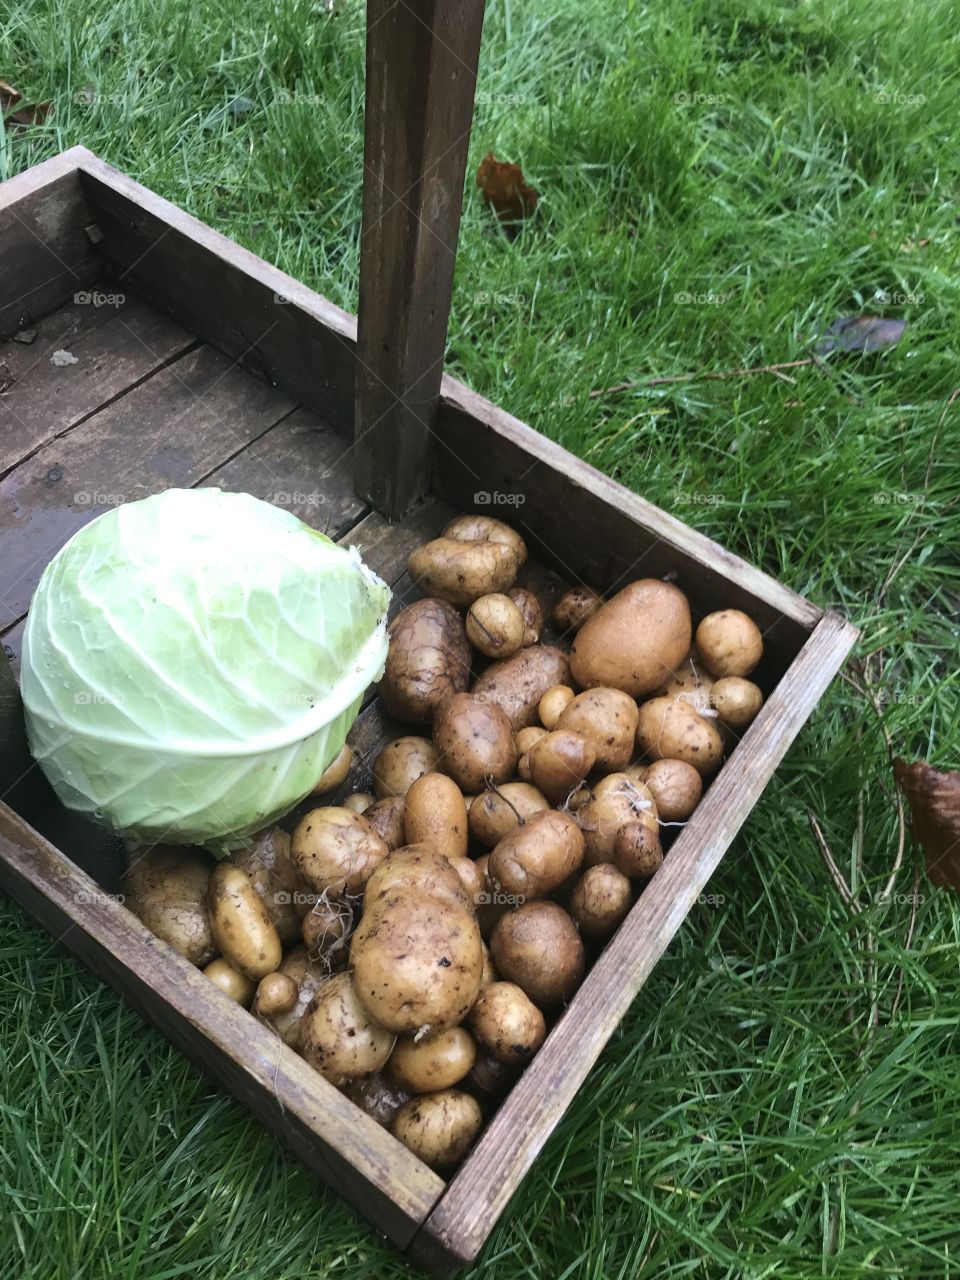 Potatoes and cabbage harvested from an allotment in a trug. 